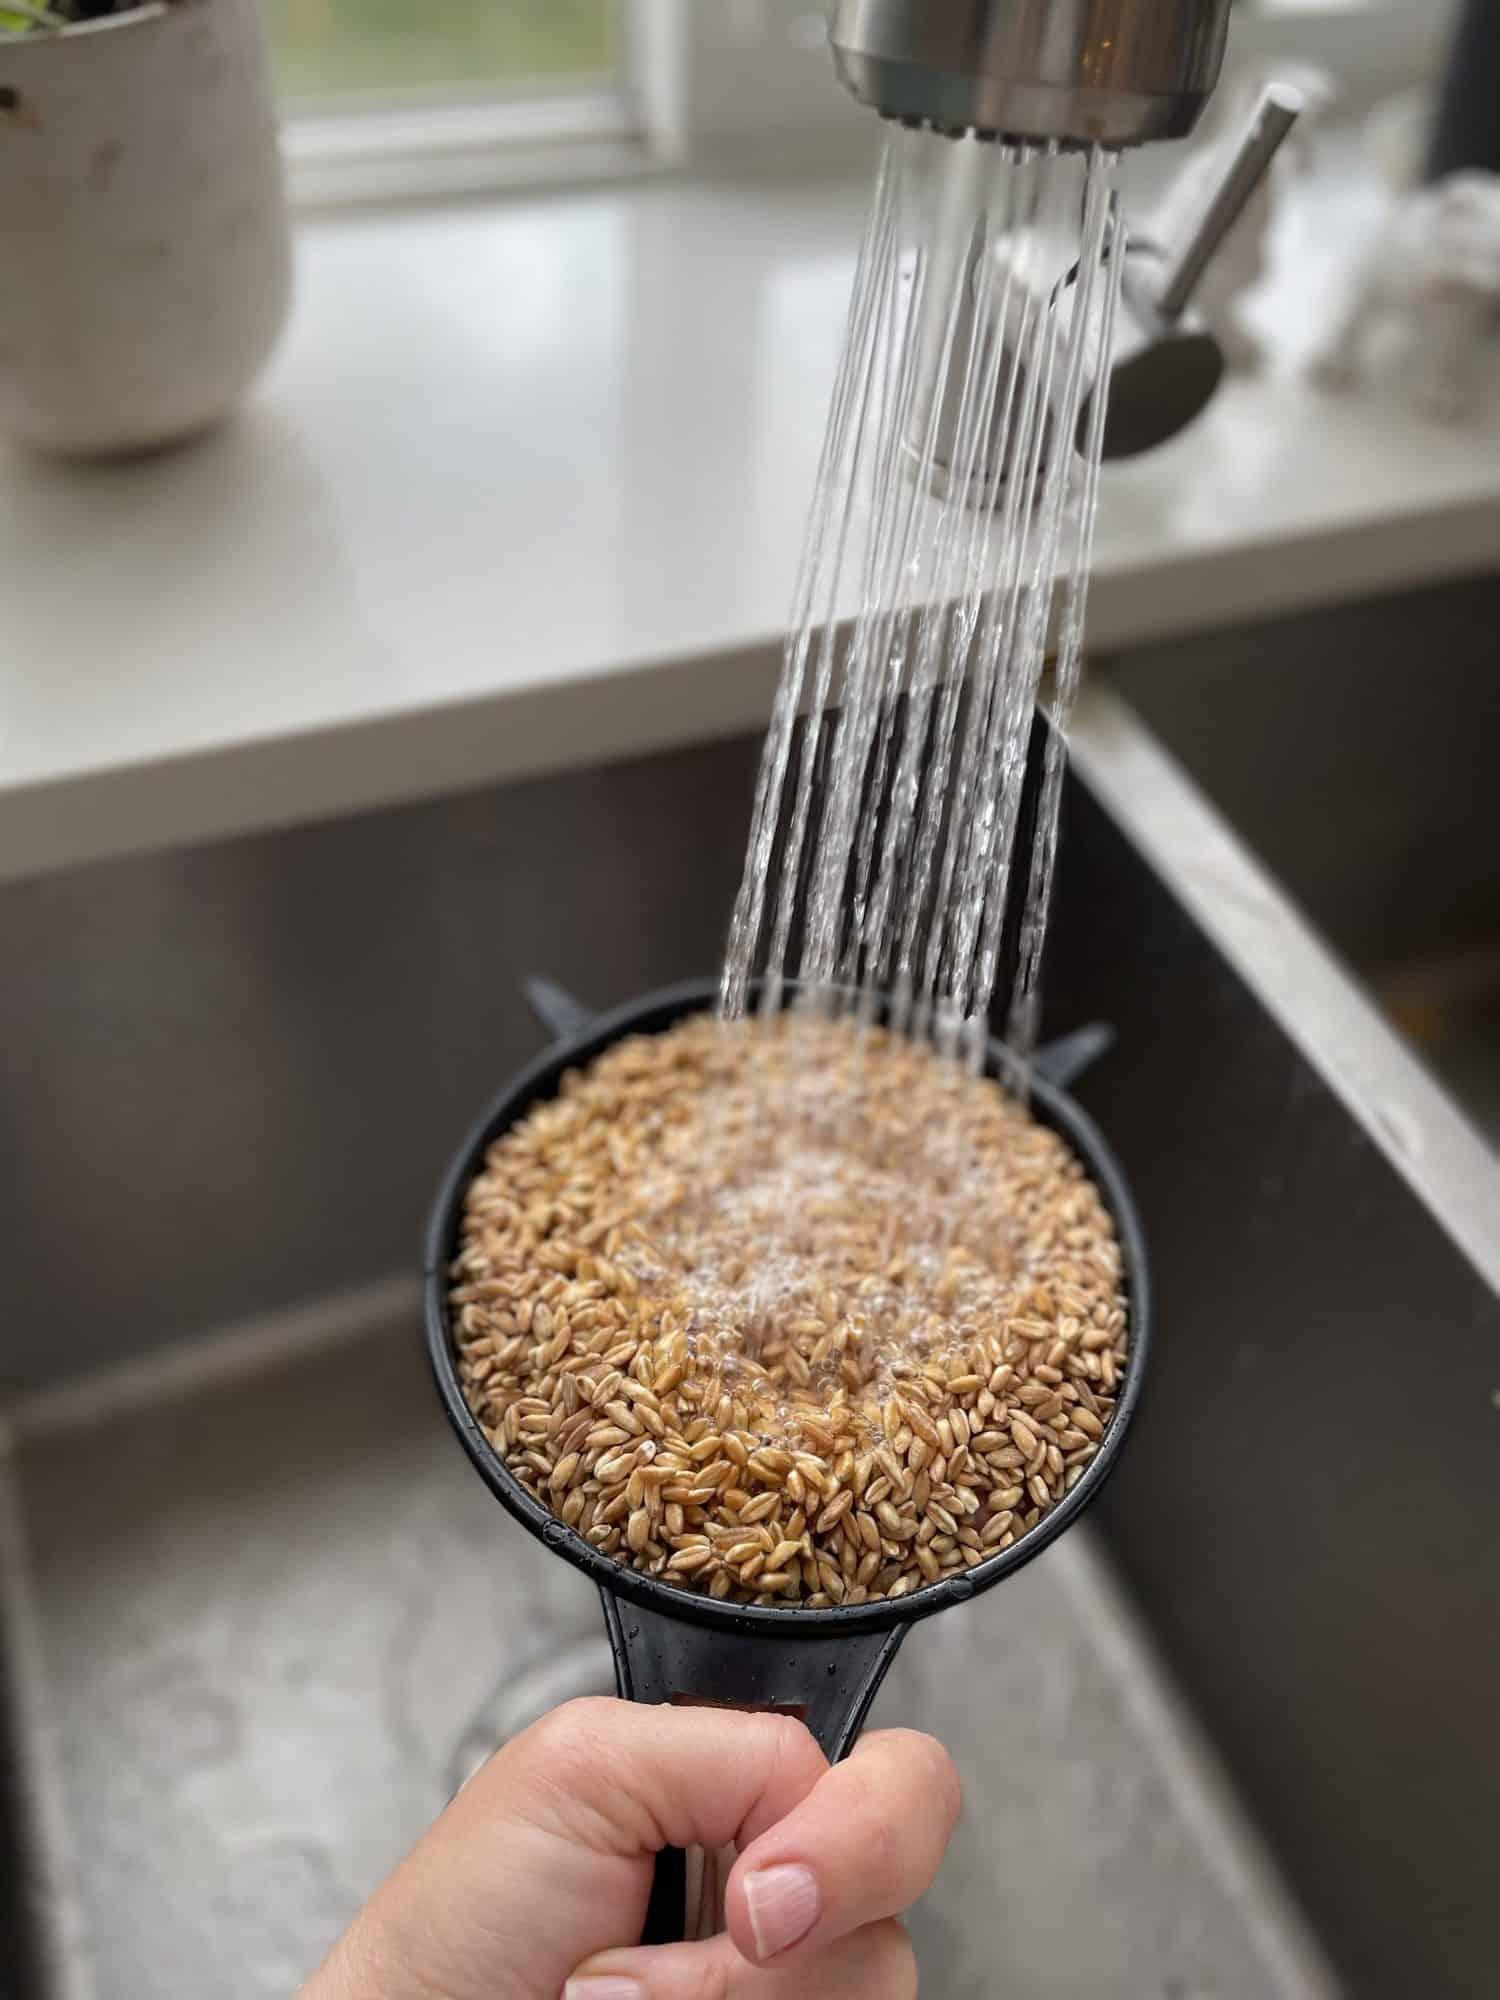 A colander full of farro being rinsed under water in a kitchen sink